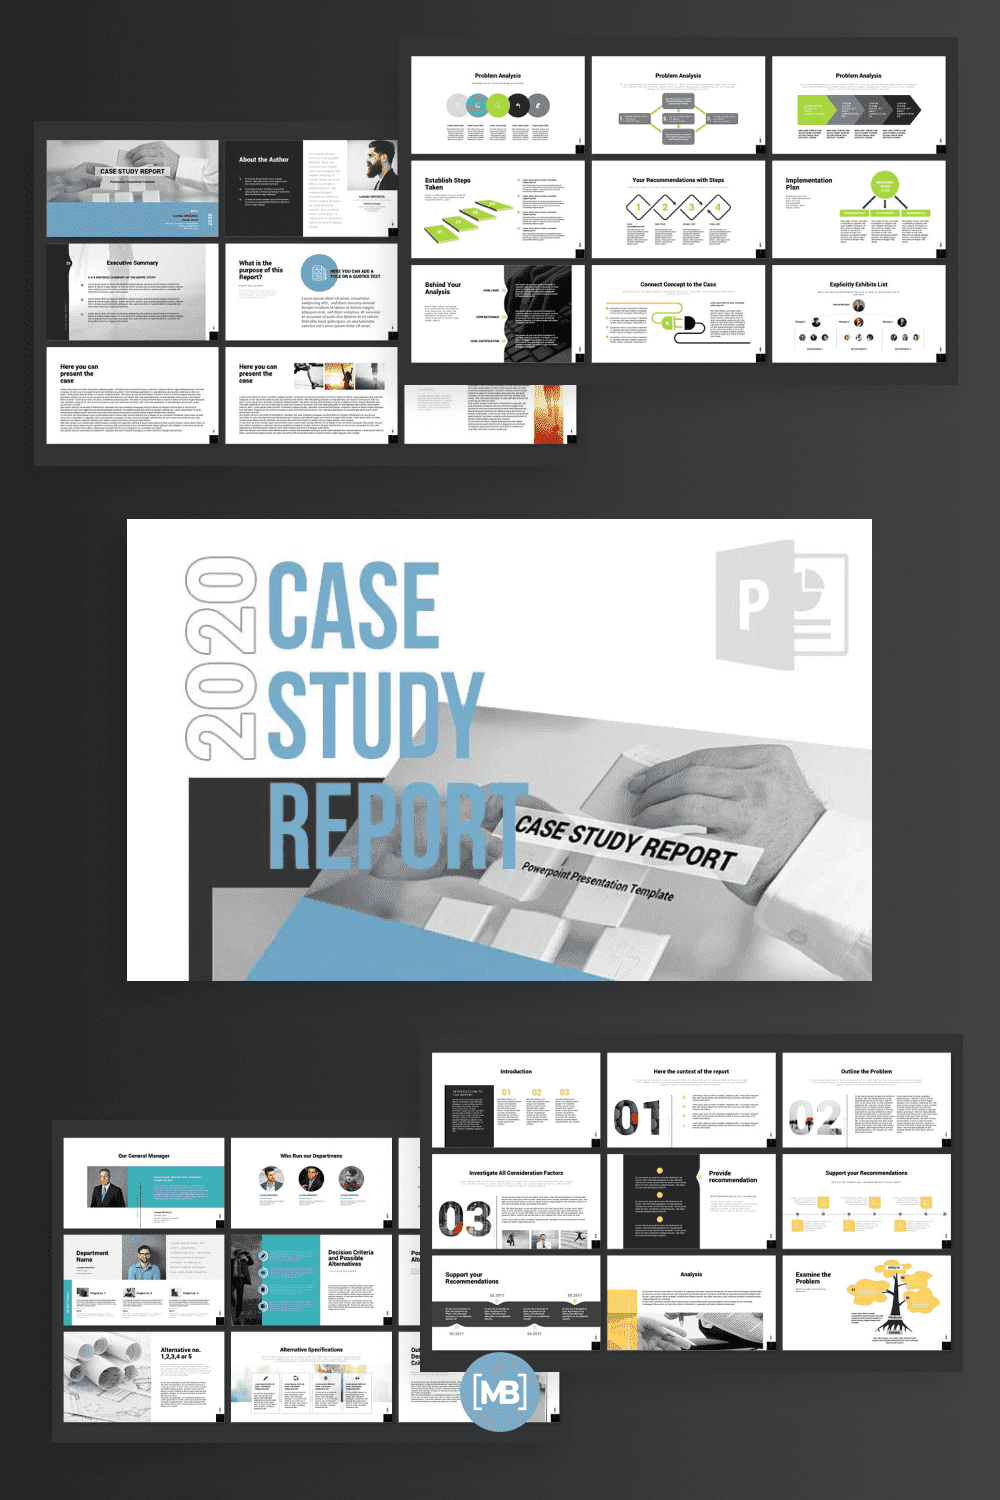 powerpoint case study template